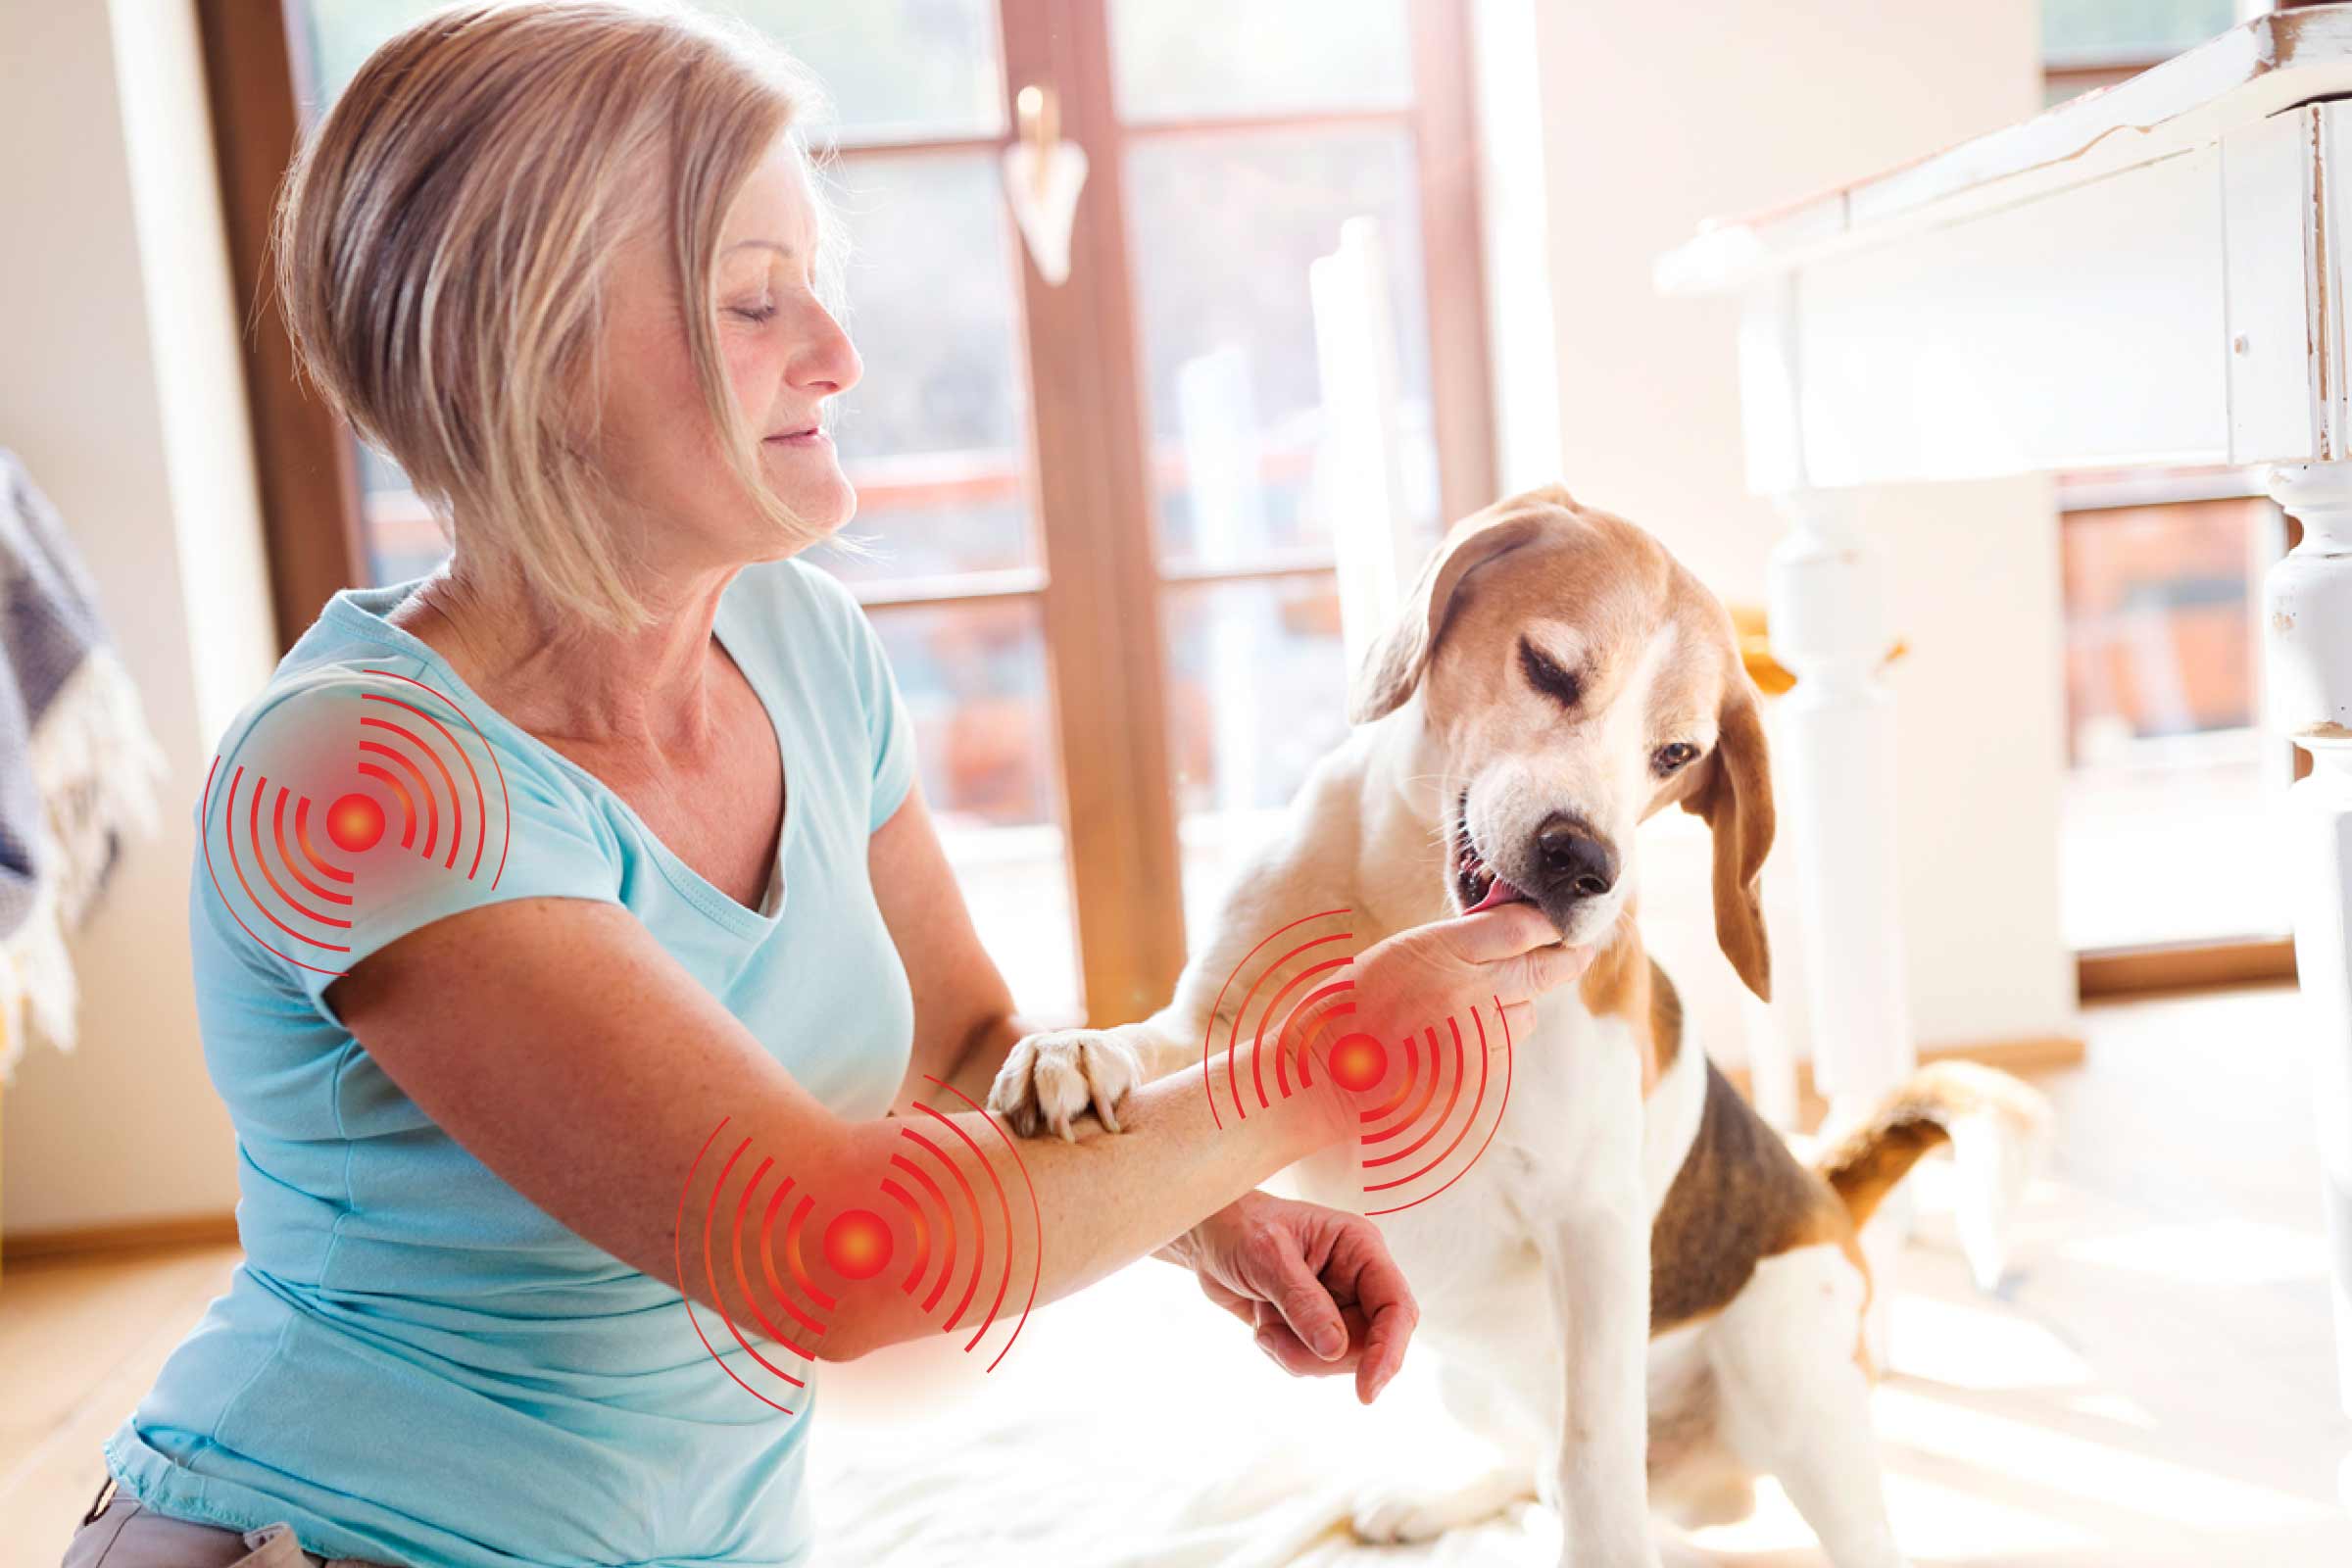 arthritis in dogs what is it and how to help your canine